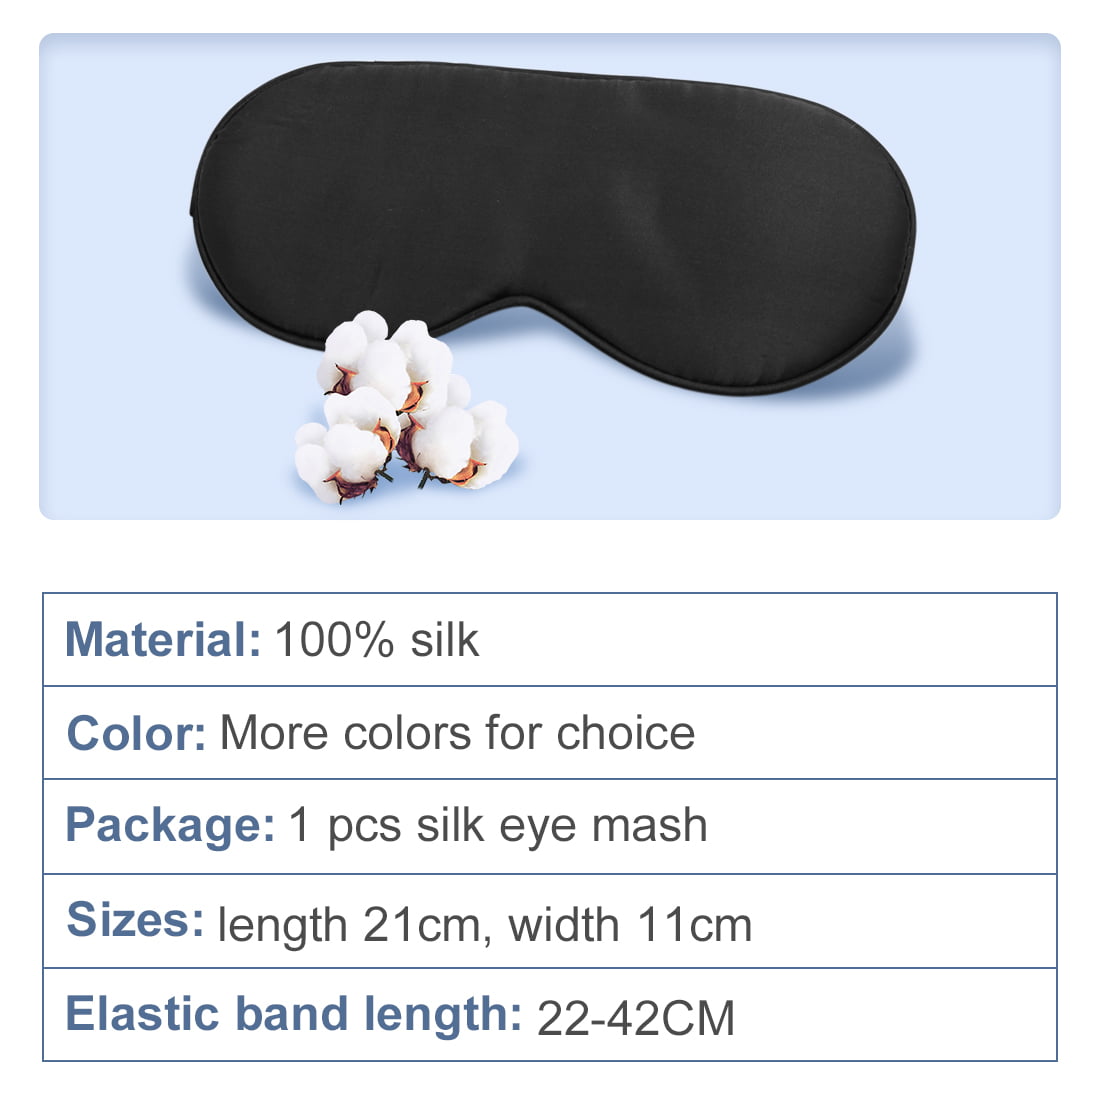 Tressential Super Soft Travel Sleep Eye Mask or Blindfold with